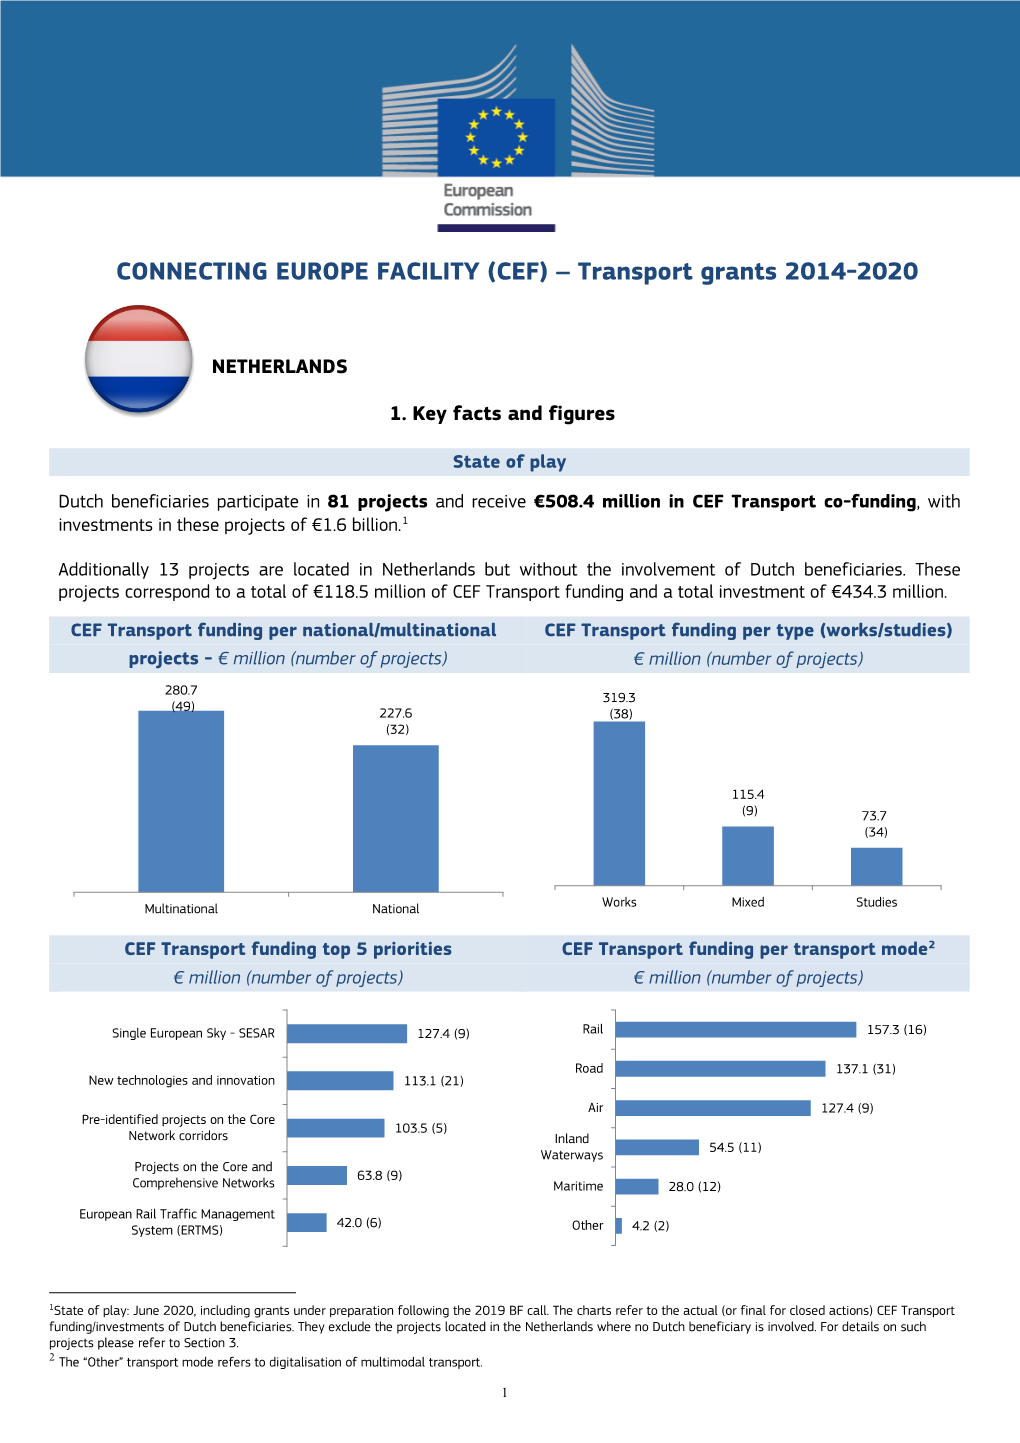 CONNECTING EUROPE FACILITY (CEF) – Transport Grants 2014-2020